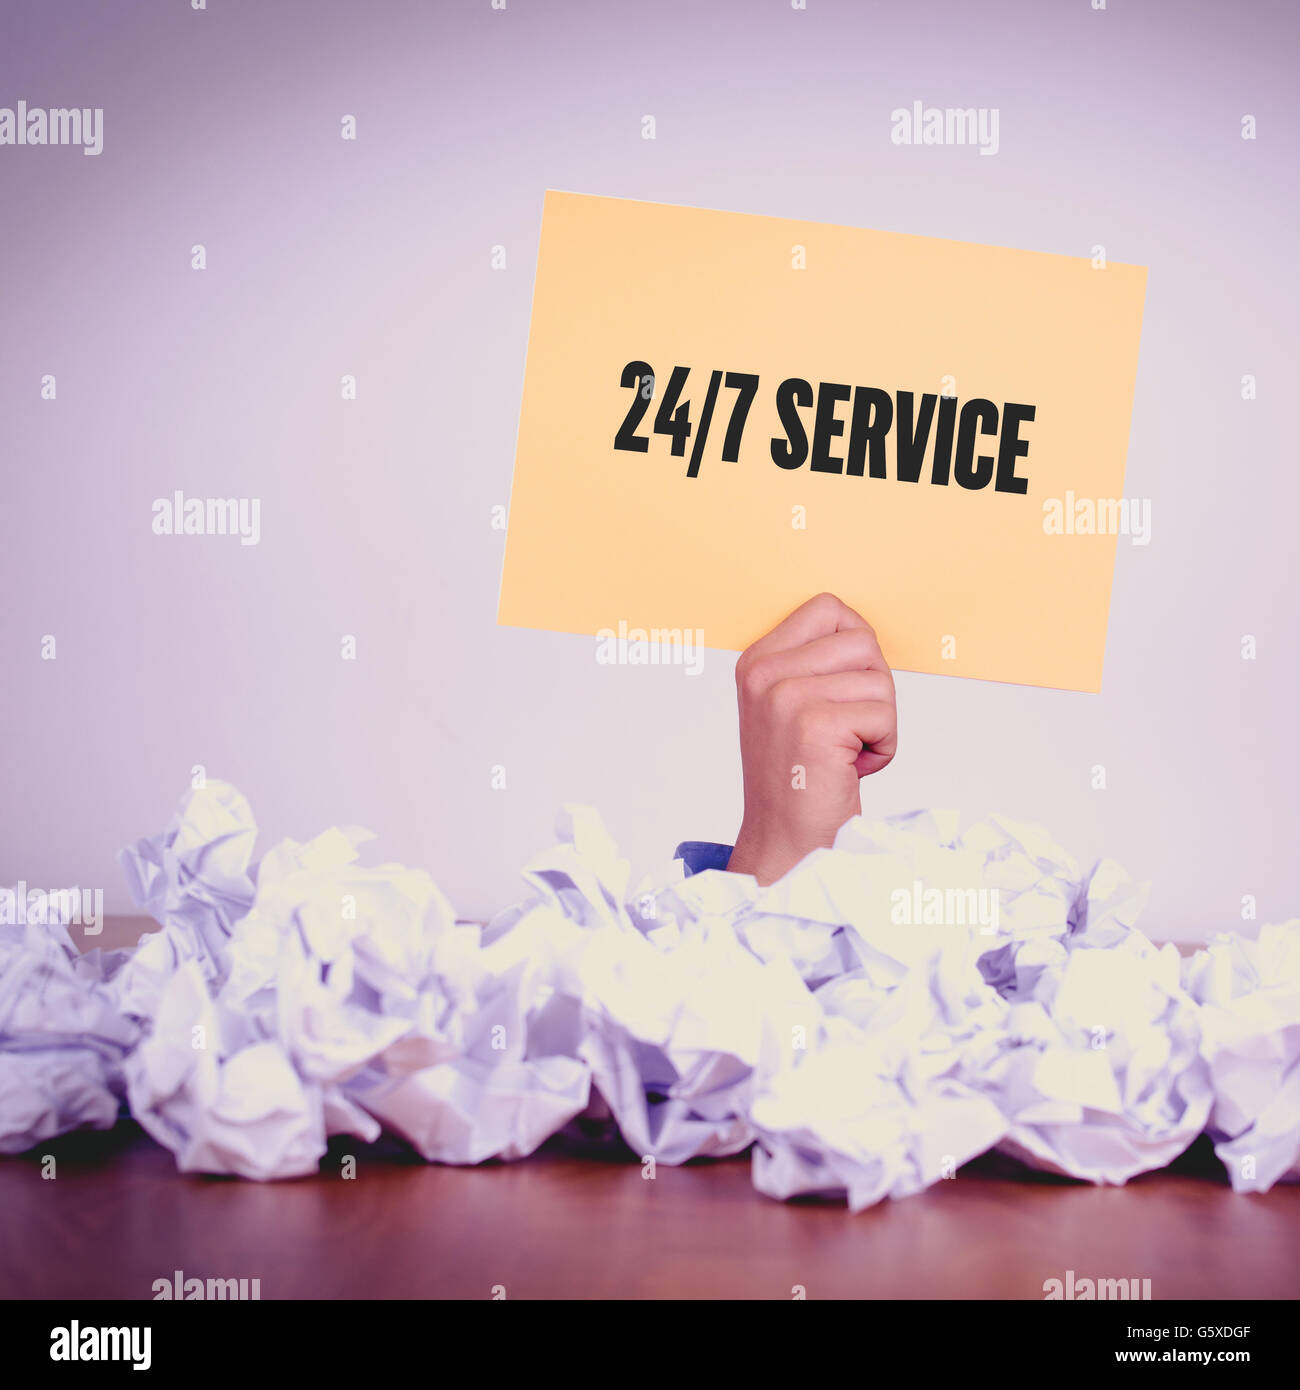 HAND HOLDING YELLOW PAPER WITH 24/7 SERVICECONCEPT Stock Photo